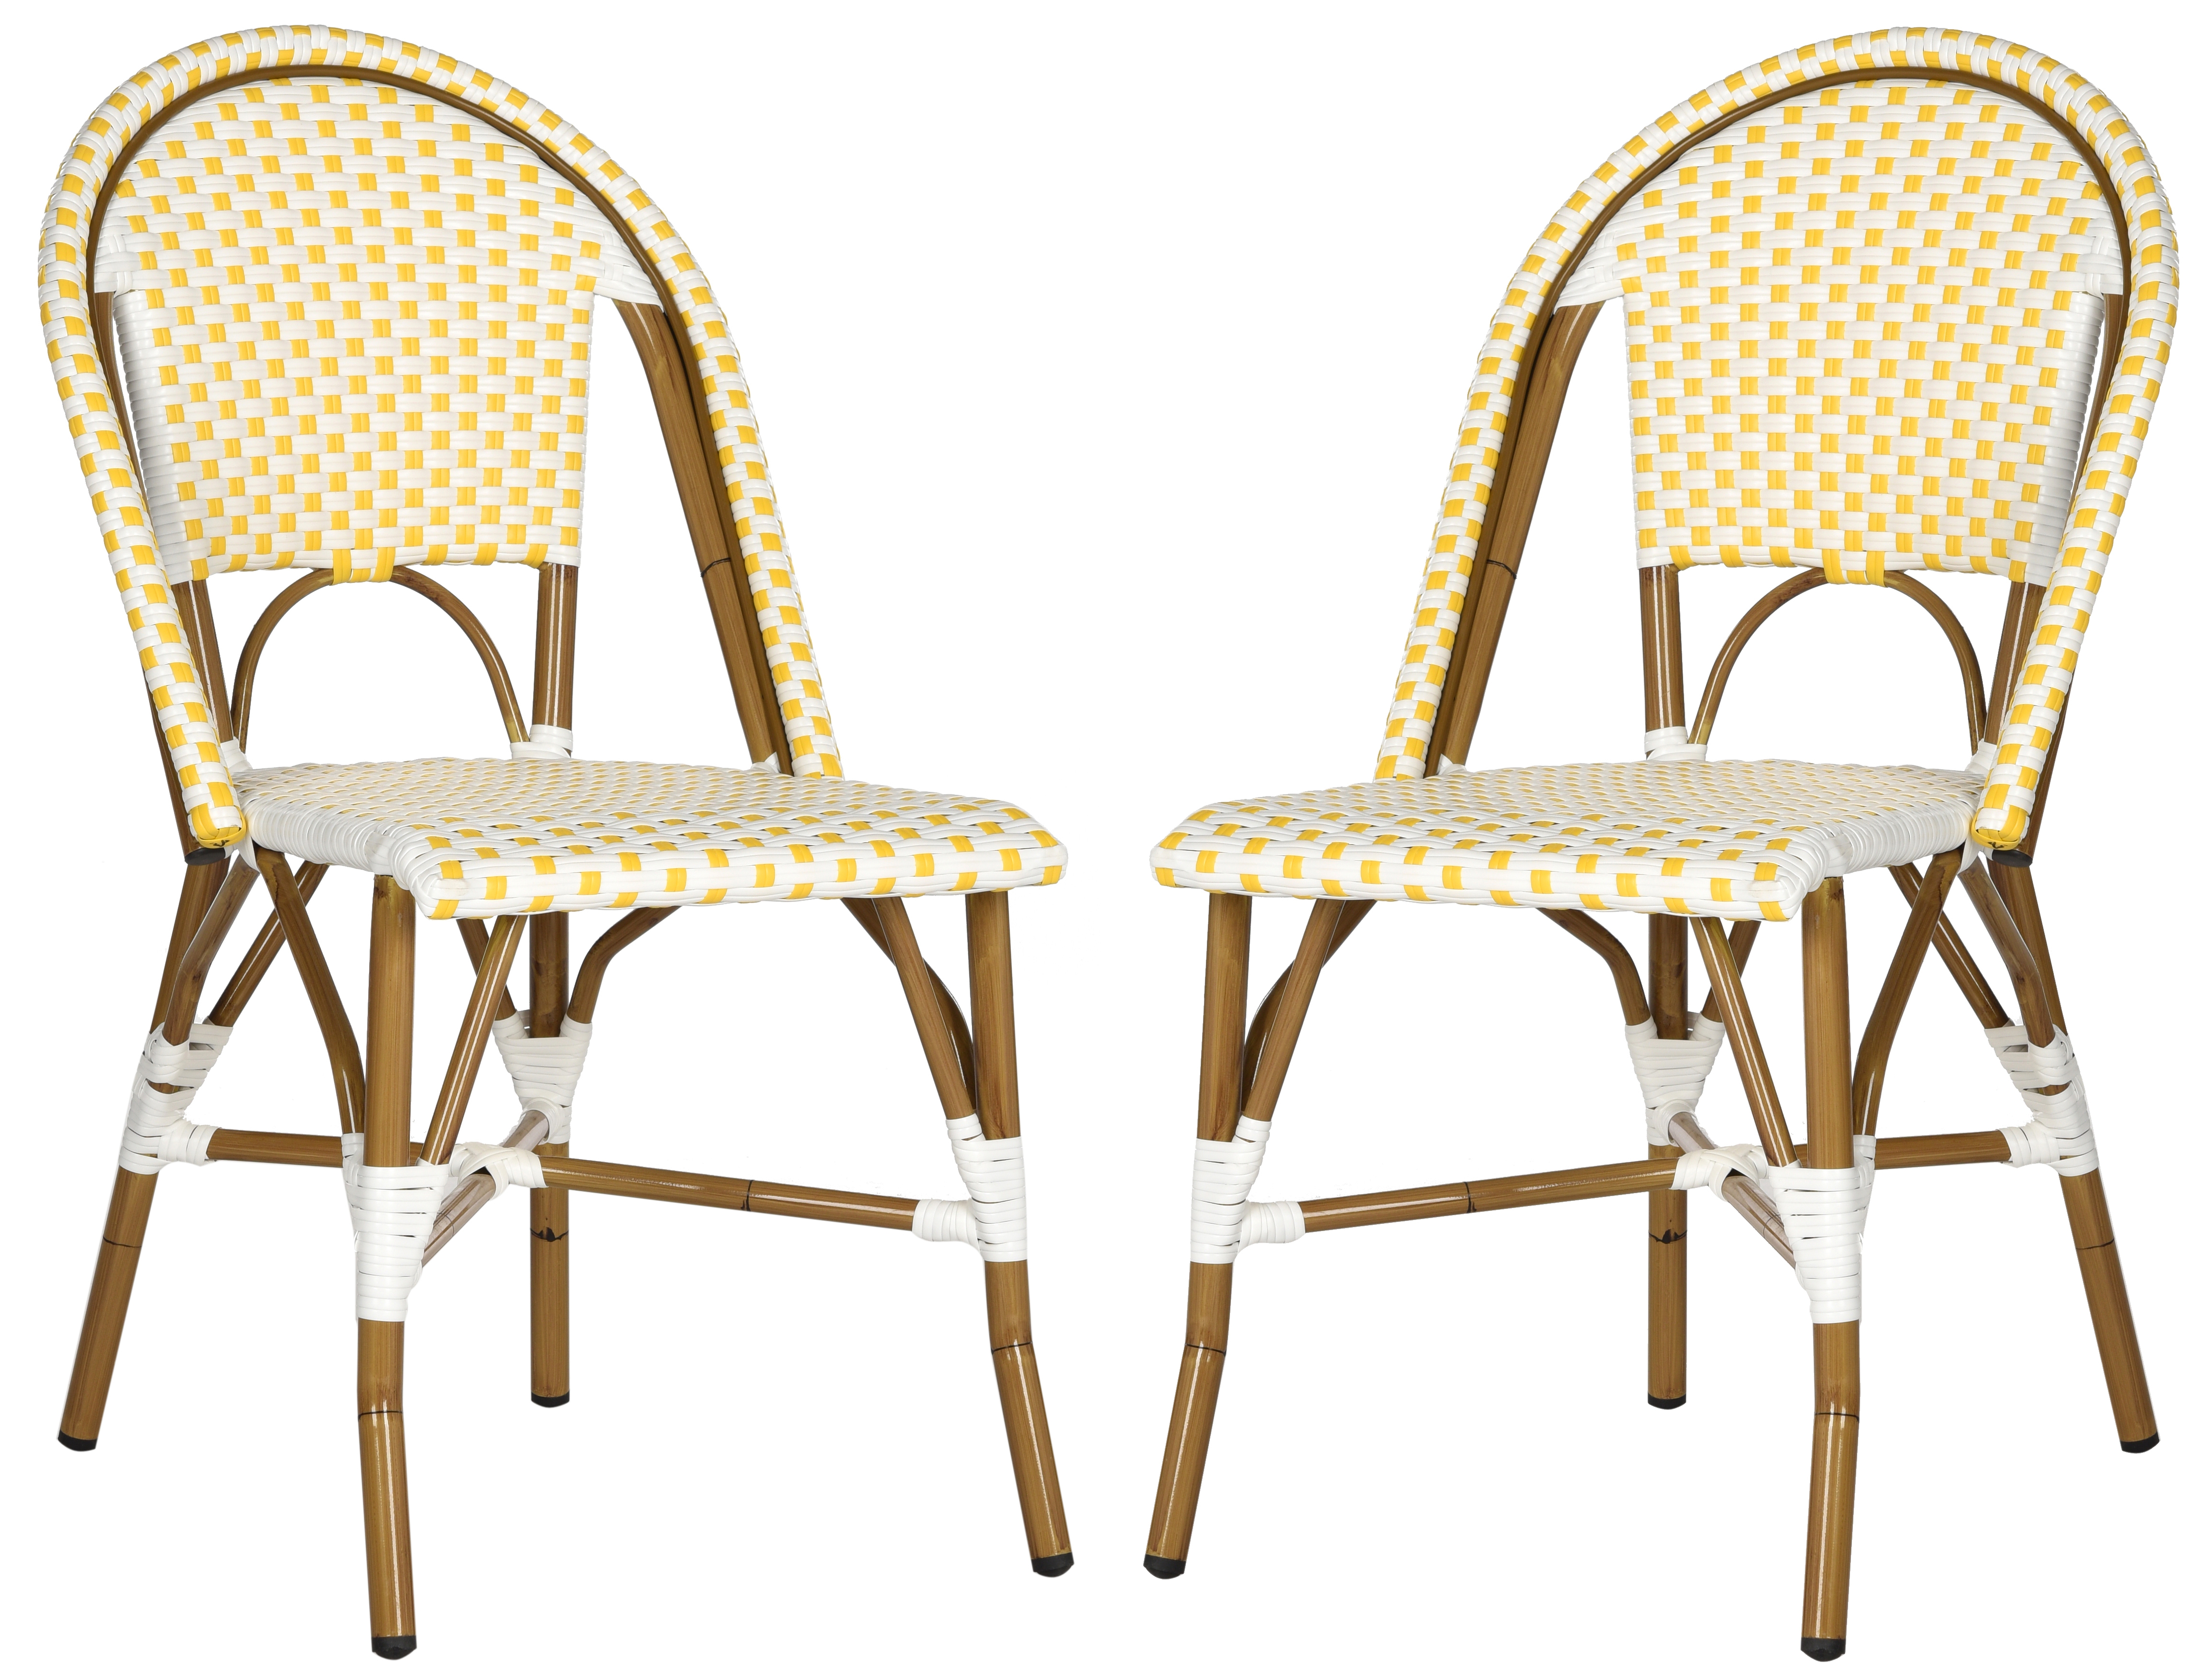 Salcha Indoor-Outdoor French Bistro Stacking Side Chair - Yellow/White/Light Brown - Arlo Home - Arlo Home